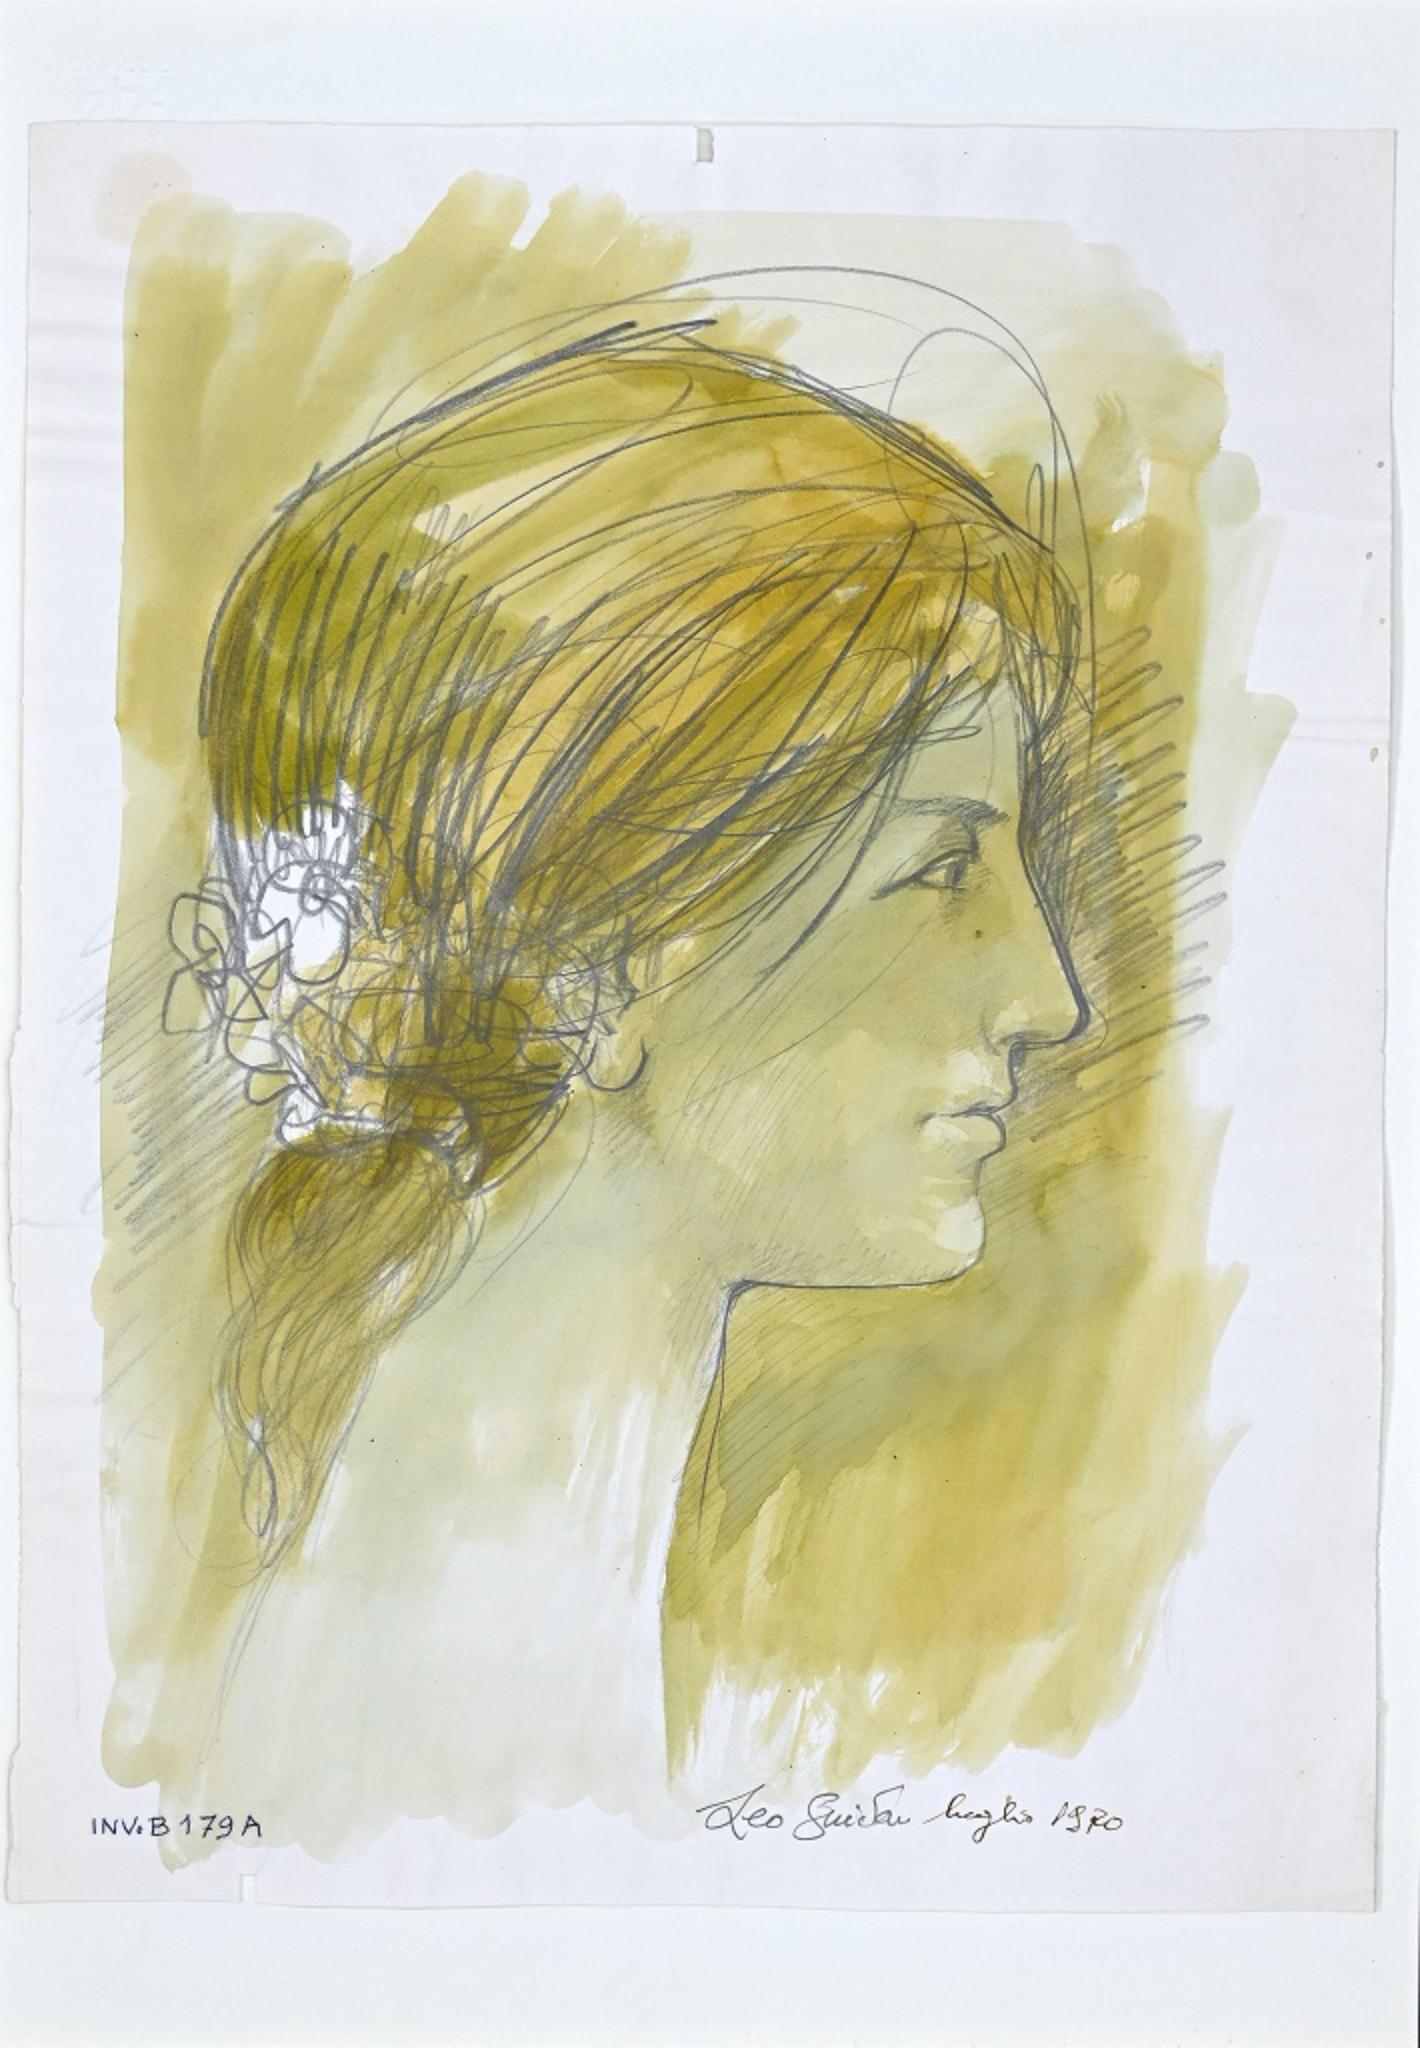 Female Profile is an original Contemporary artwork realized in 1970 by the italian artist Leo Guida.

Hand-signed in pencil and dated in ink on the lower right corner: Leo Guida Luglio 2970. 

Original pencil and watercolor on paper. 

The work is